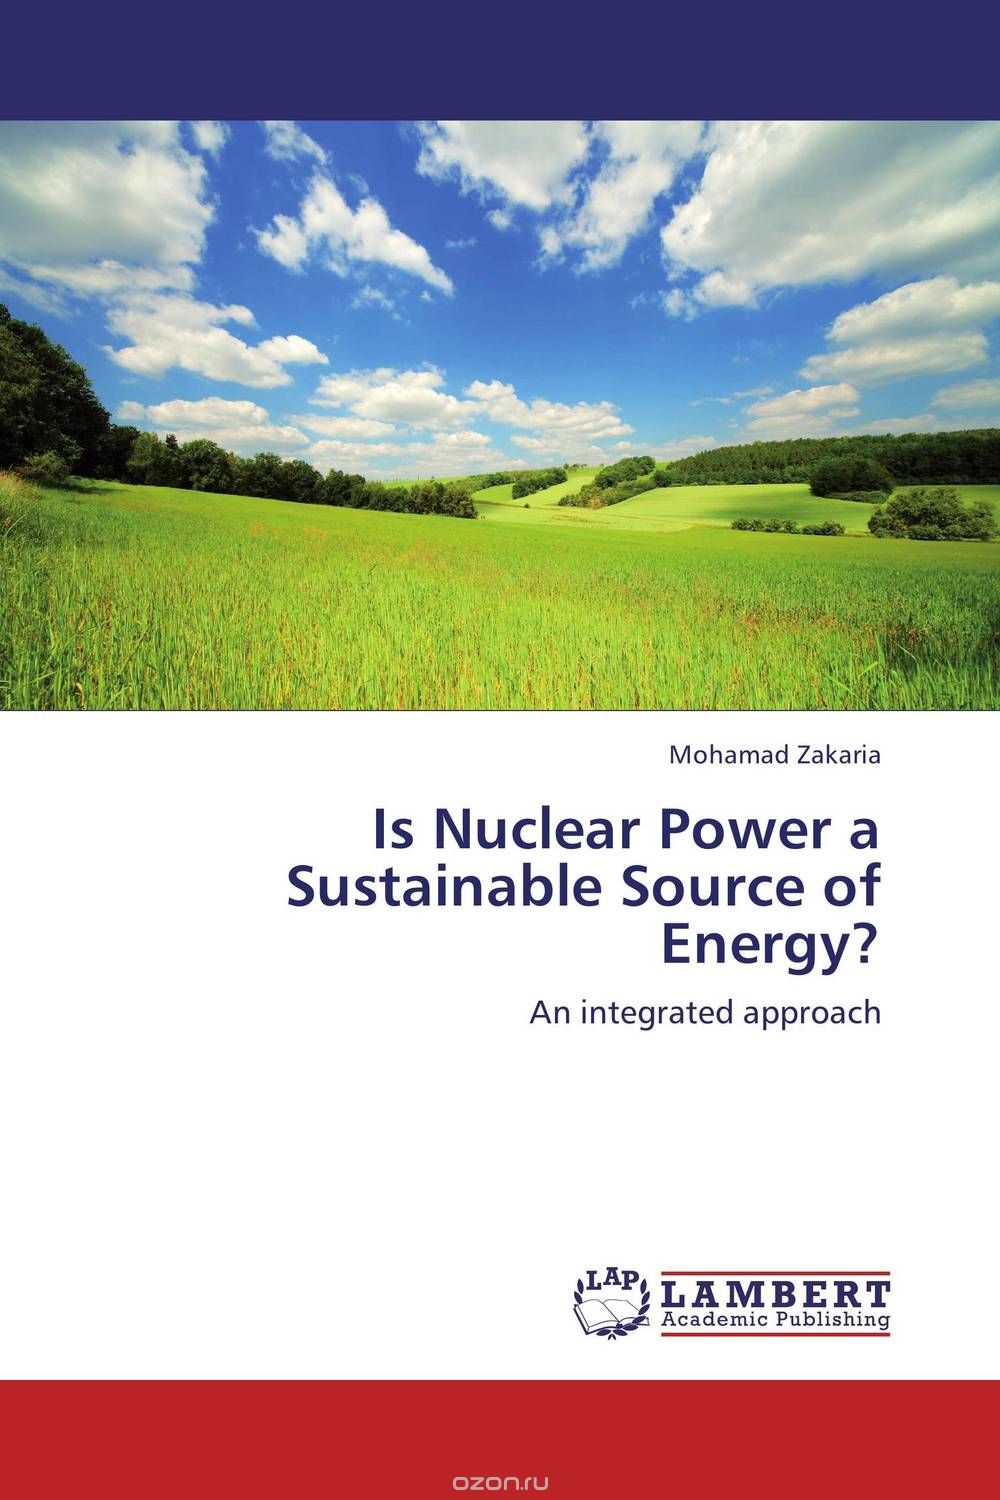 Is Nuclear Power a Sustainable Source of Energy?